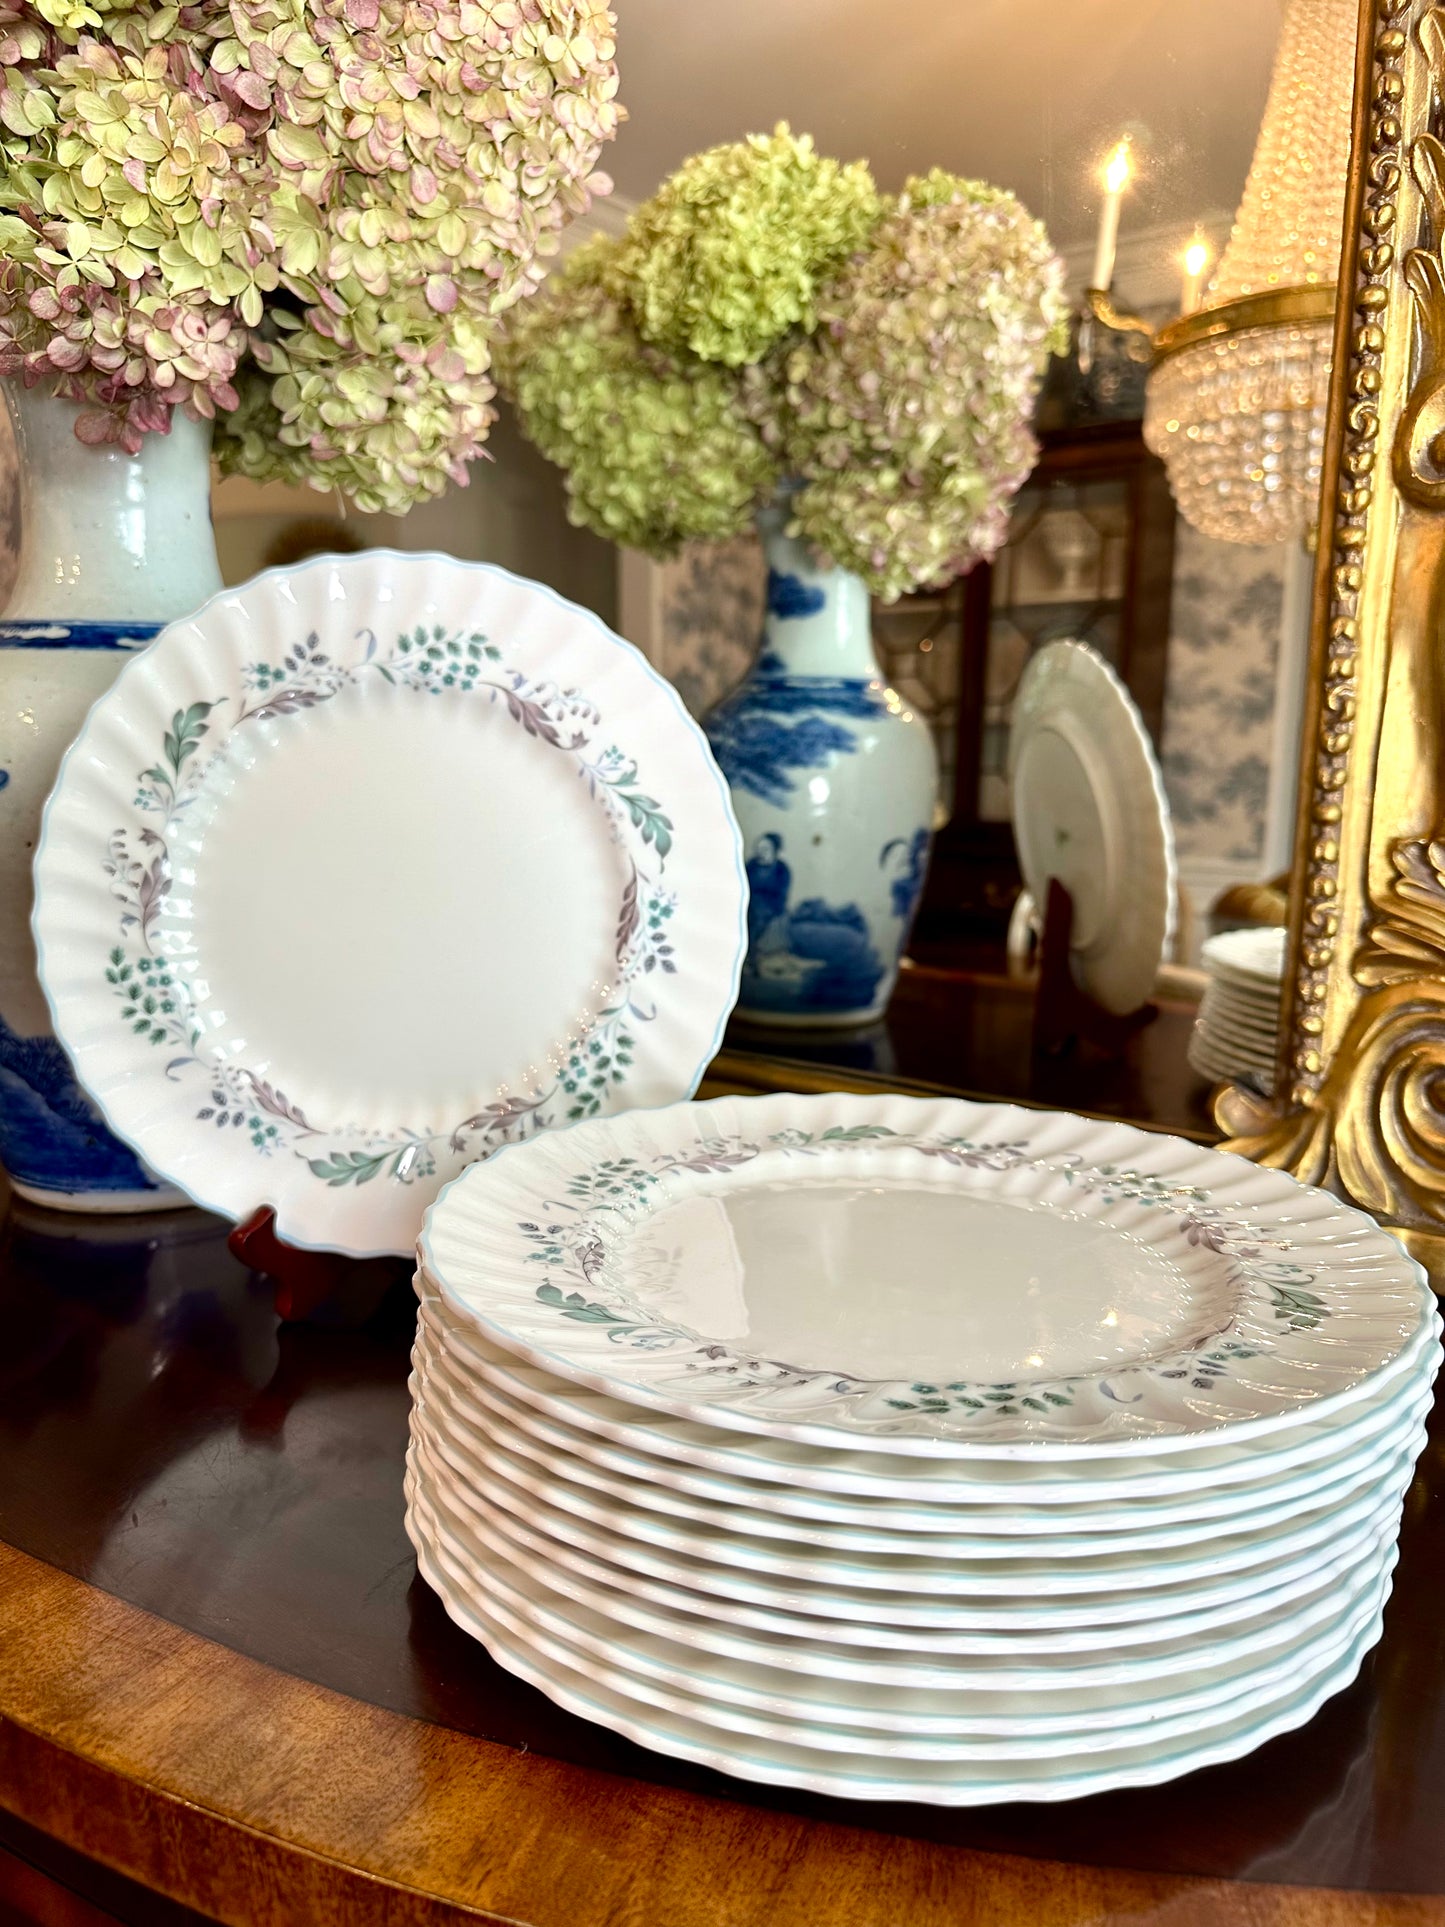 Classic Set of 12 Dinner Plates by Royal Doulton Bone China